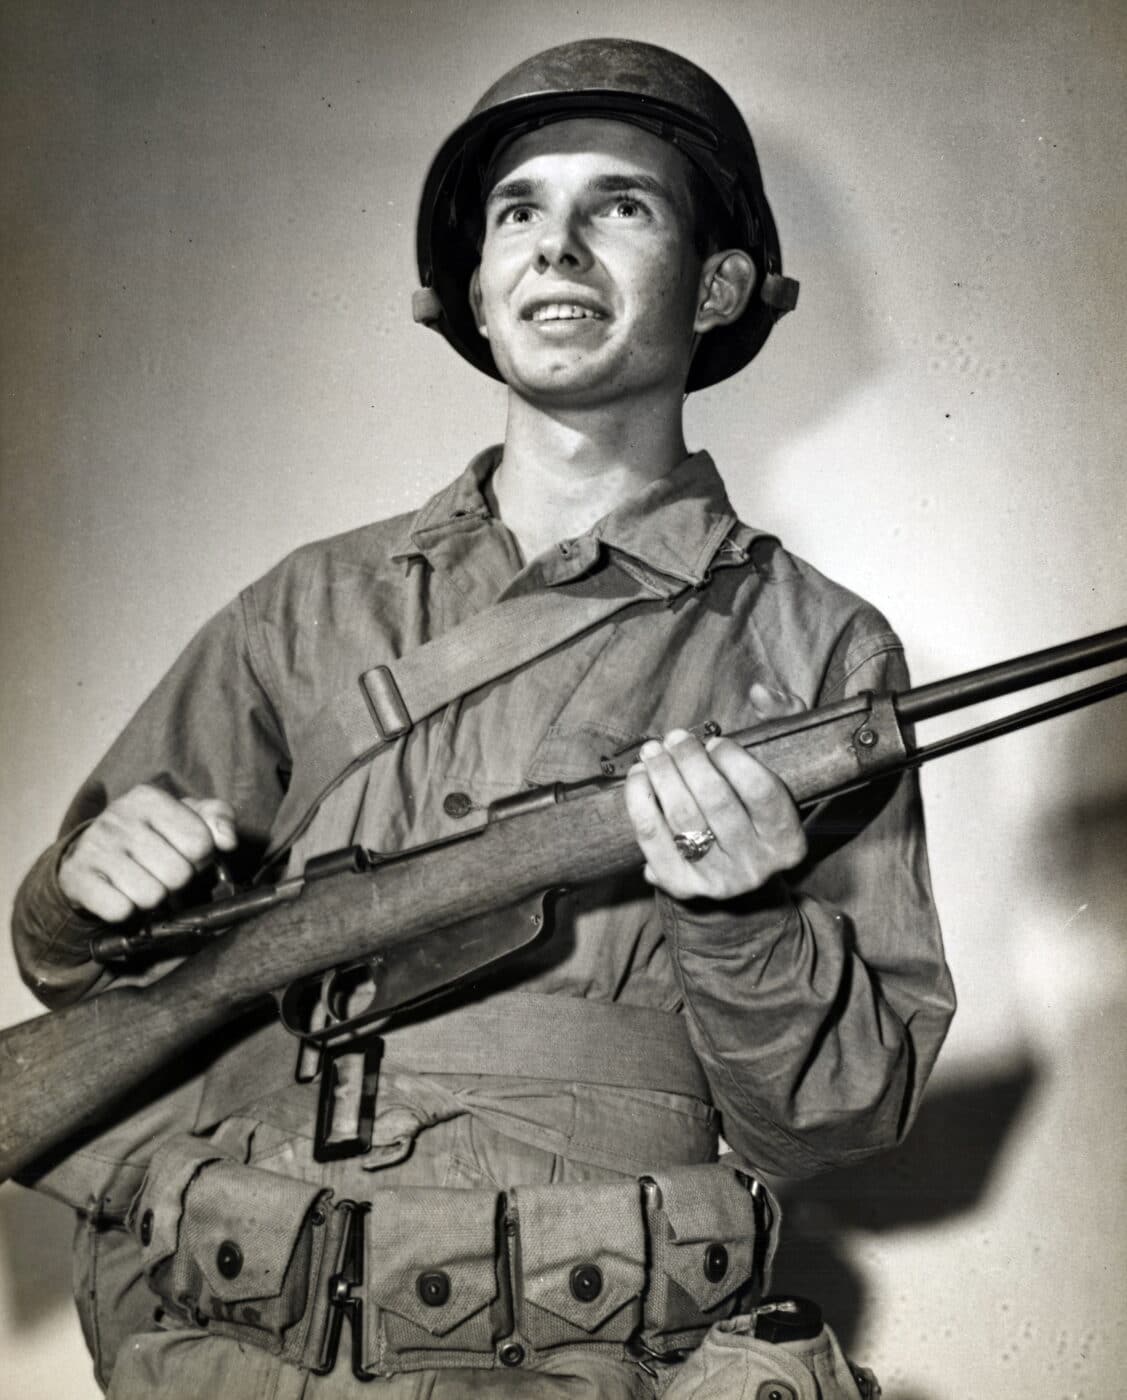 Soldier with Carcano rifle captured by the US Coast Guard in Sicily